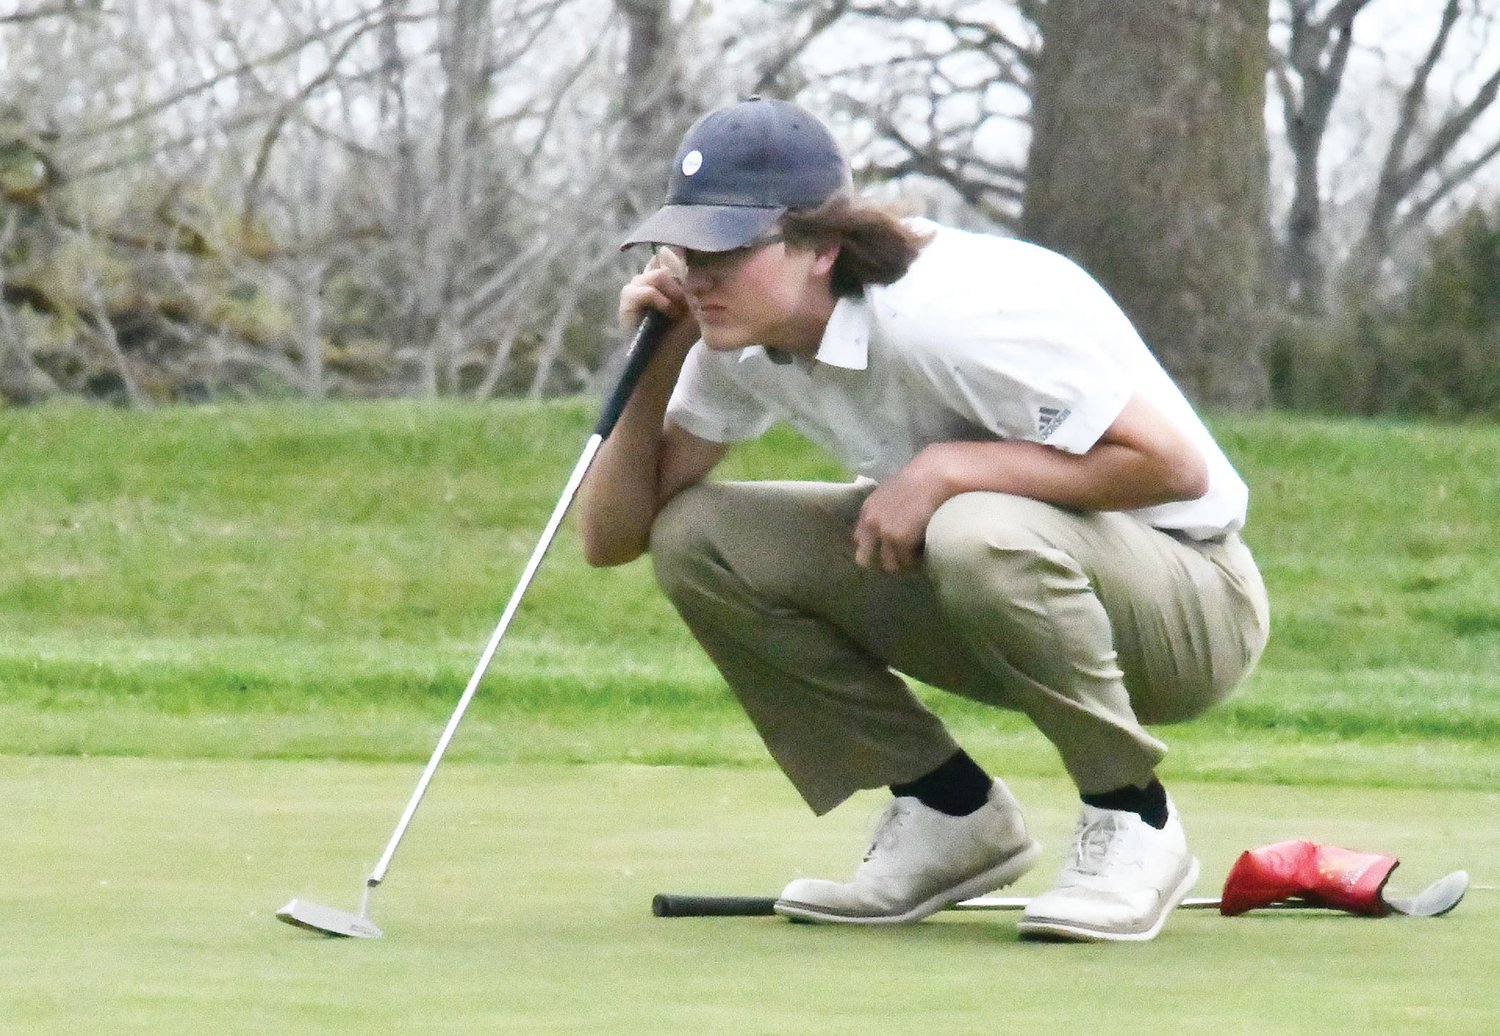 Westran’s Logan Bain examines a putt on the par-5 Hole No. 2 at Heritage Hills Golf Course in Moberly during a quadrangular last Thursday. Bain was the medalist with a nine-hole score of 38.